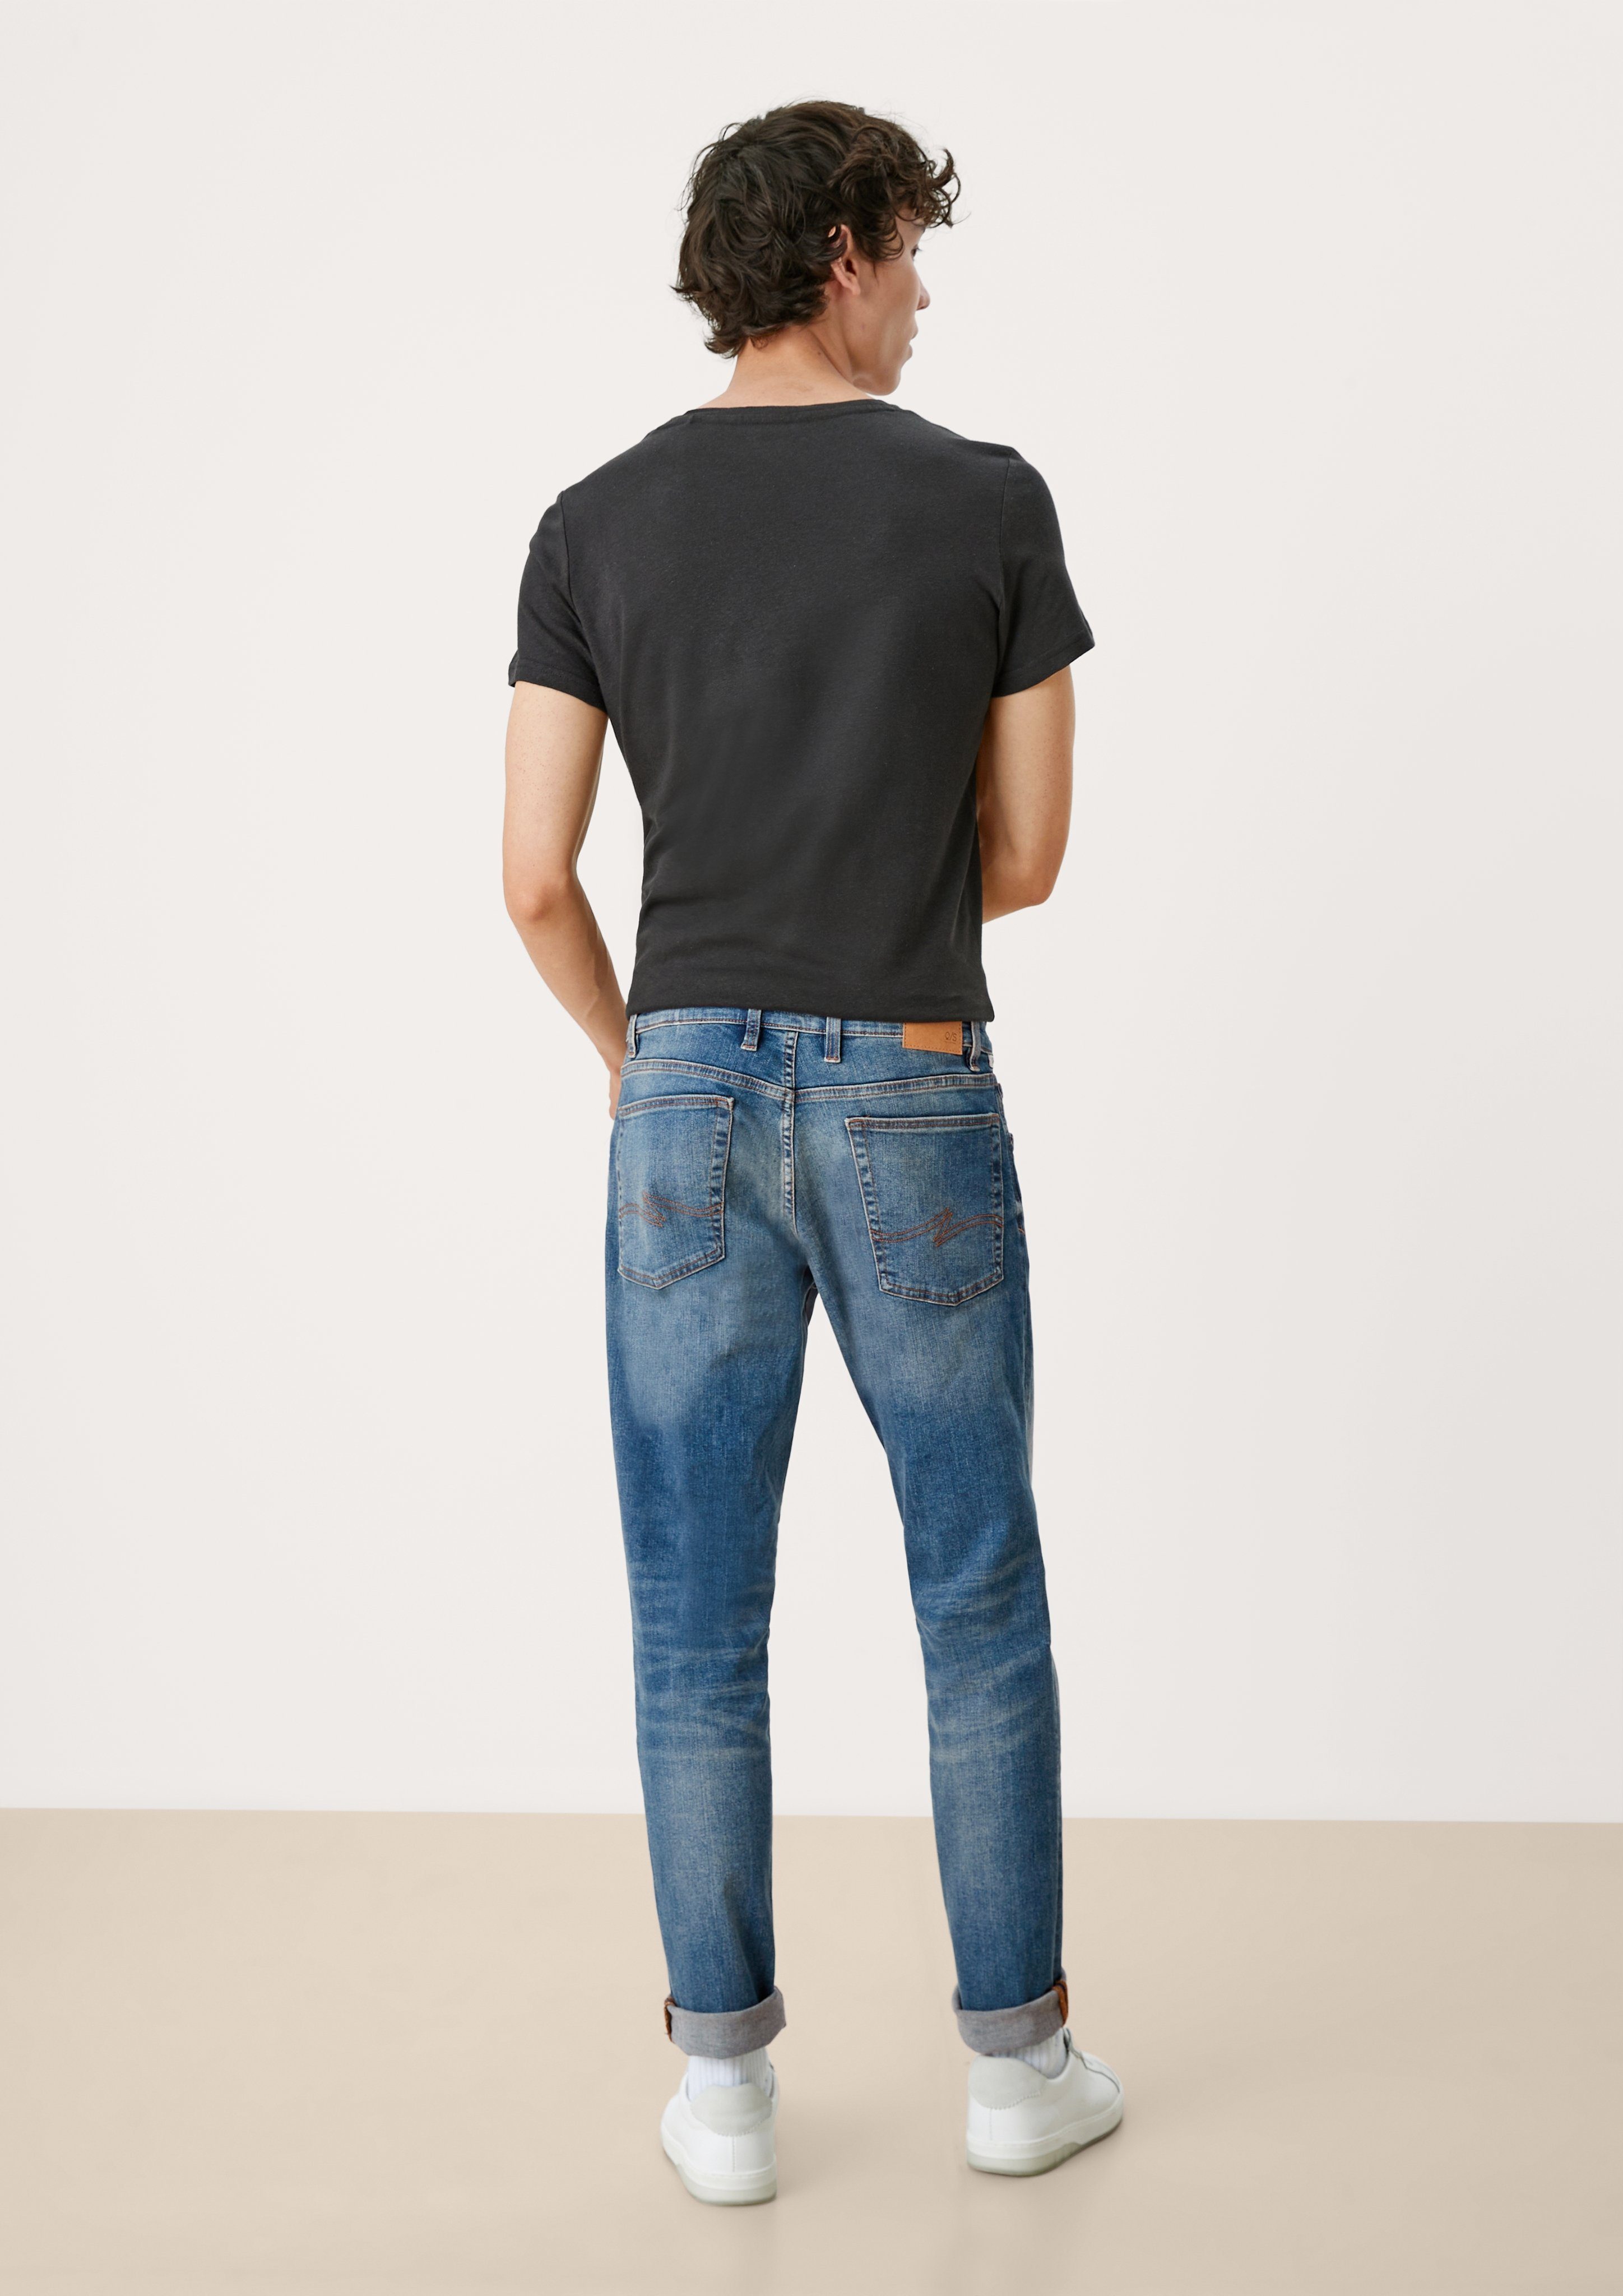 Herren Jeans Q/S by s.Oliver 5-Pocket-Jeans Regular: Straight leg-Jeans Waschung